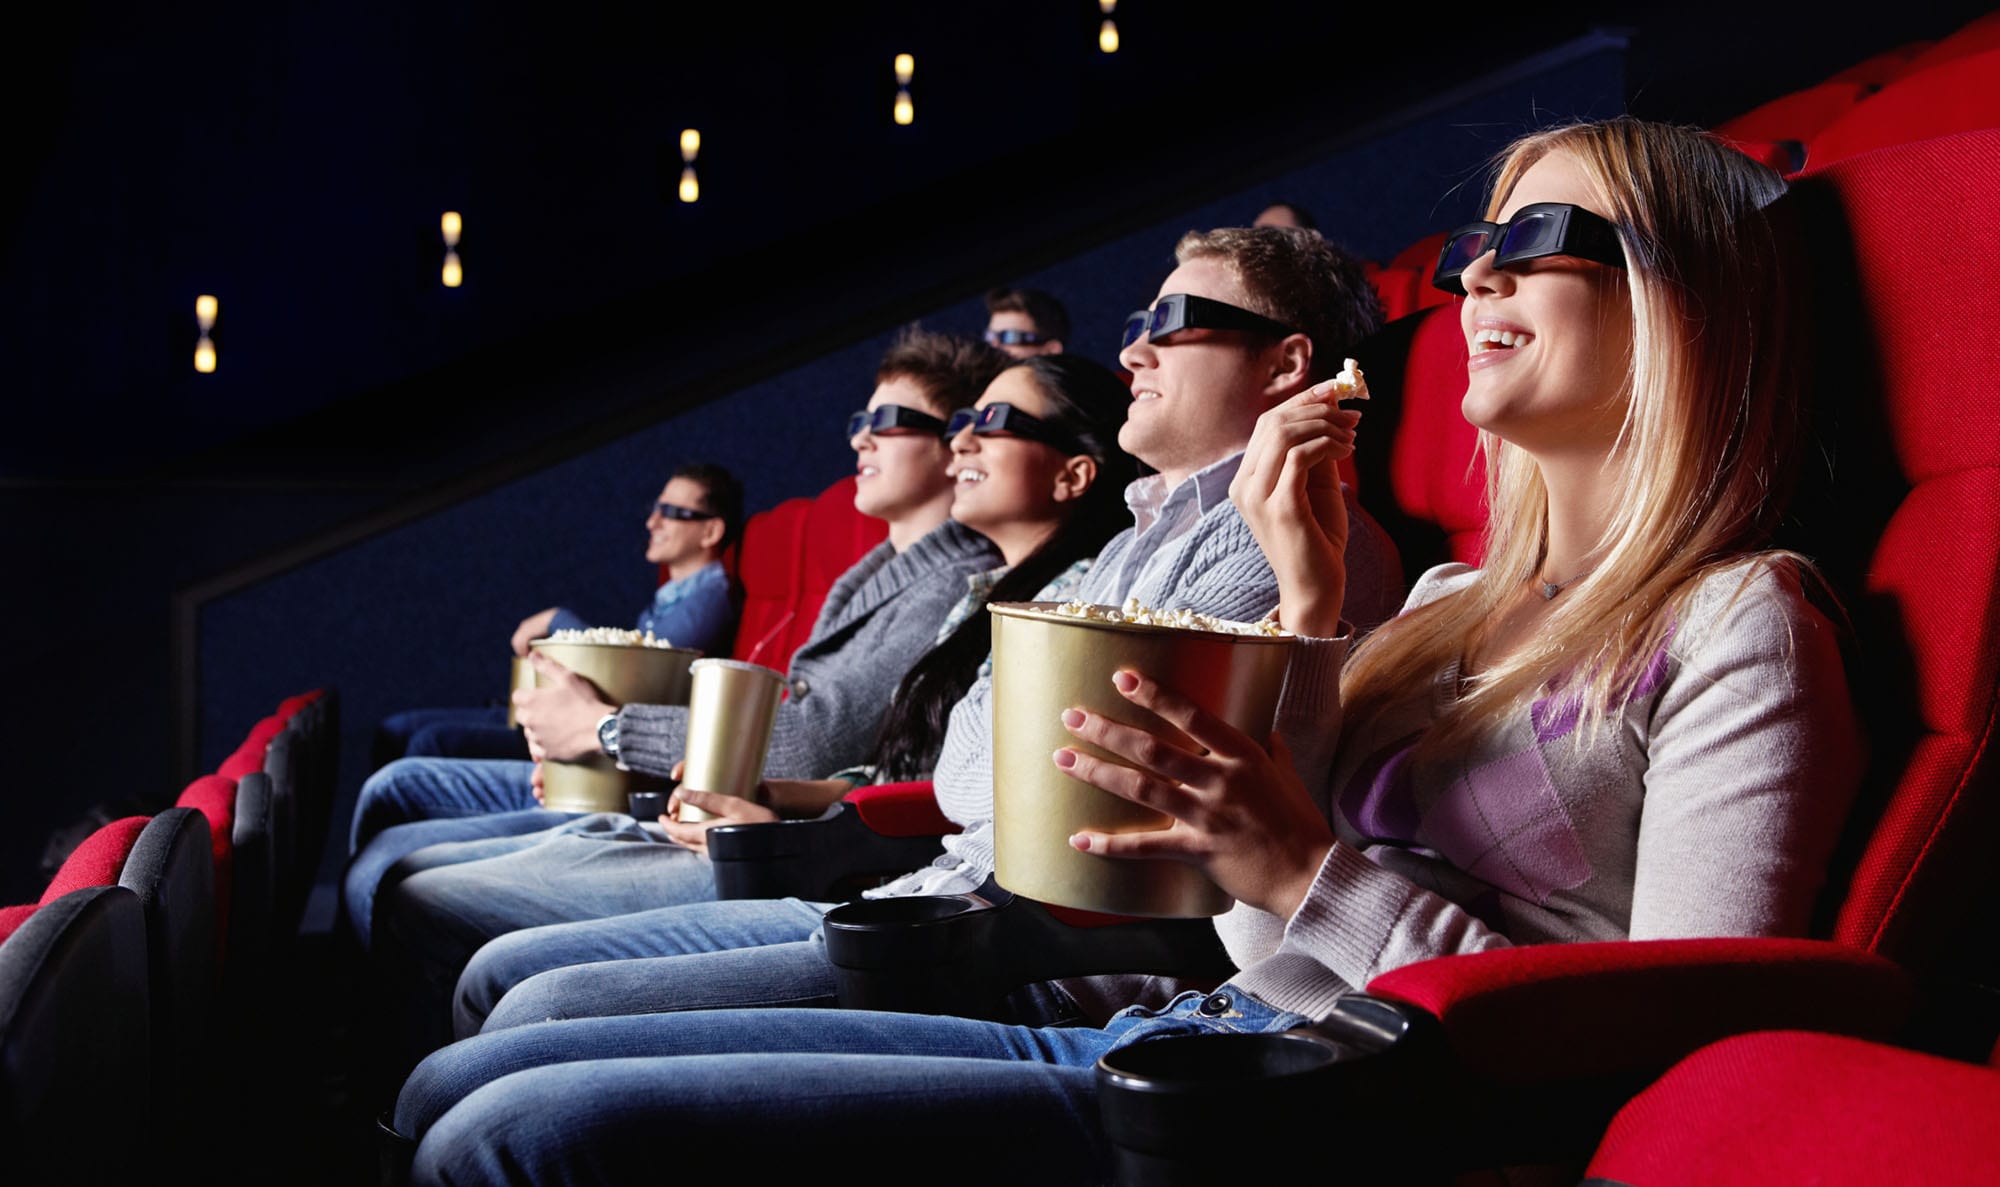 Do you remember when going to the cinema was the highlight of the weekend? Let's explore how movie theaters are ignoring the power of streaming.